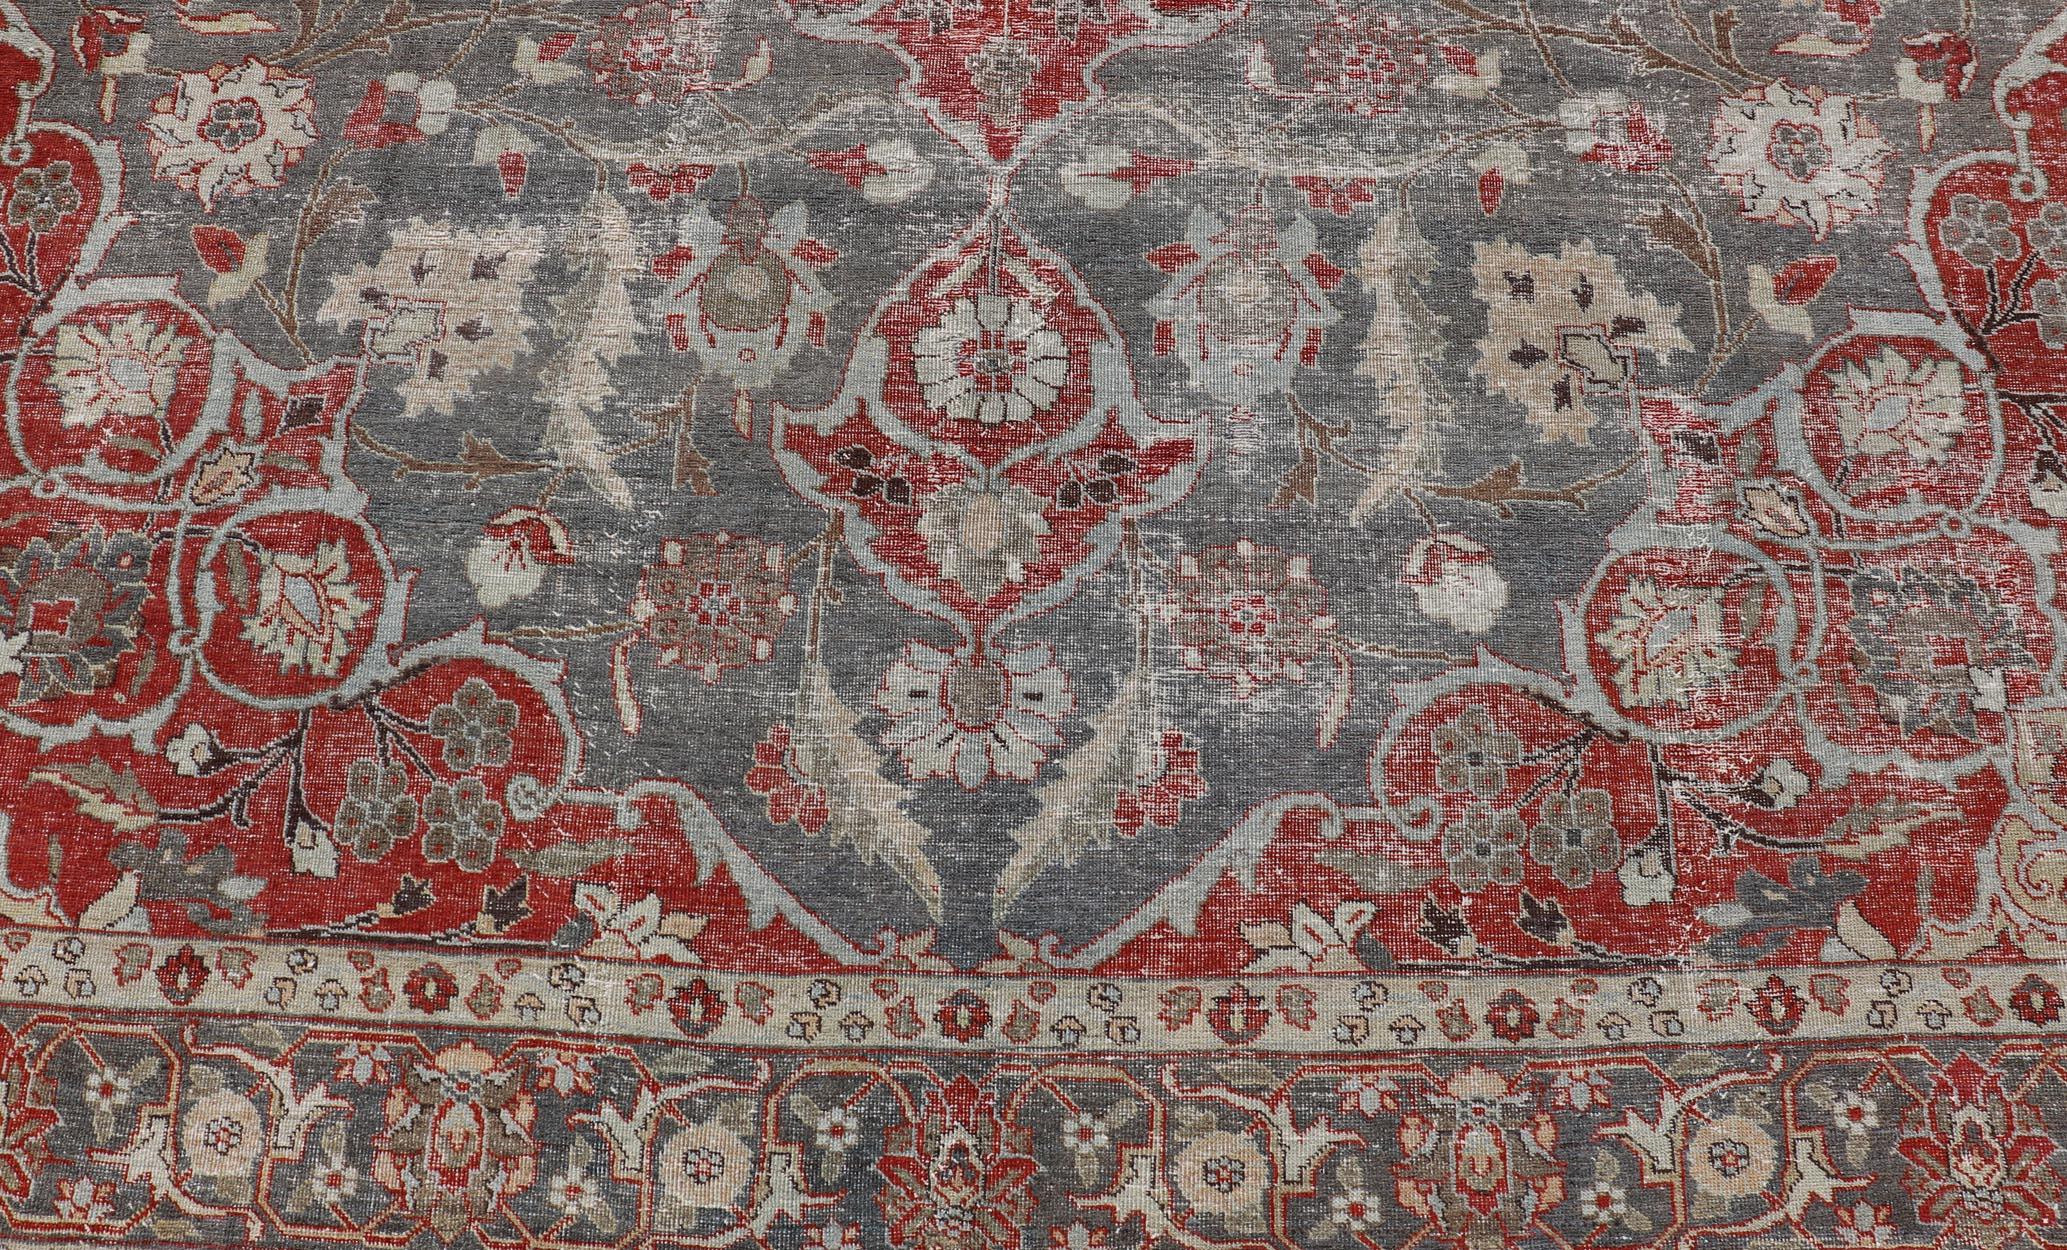 Antique Persian Tabriz Rug with Floral Medallion Design in Tan, Red, and Lt Blue For Sale 5